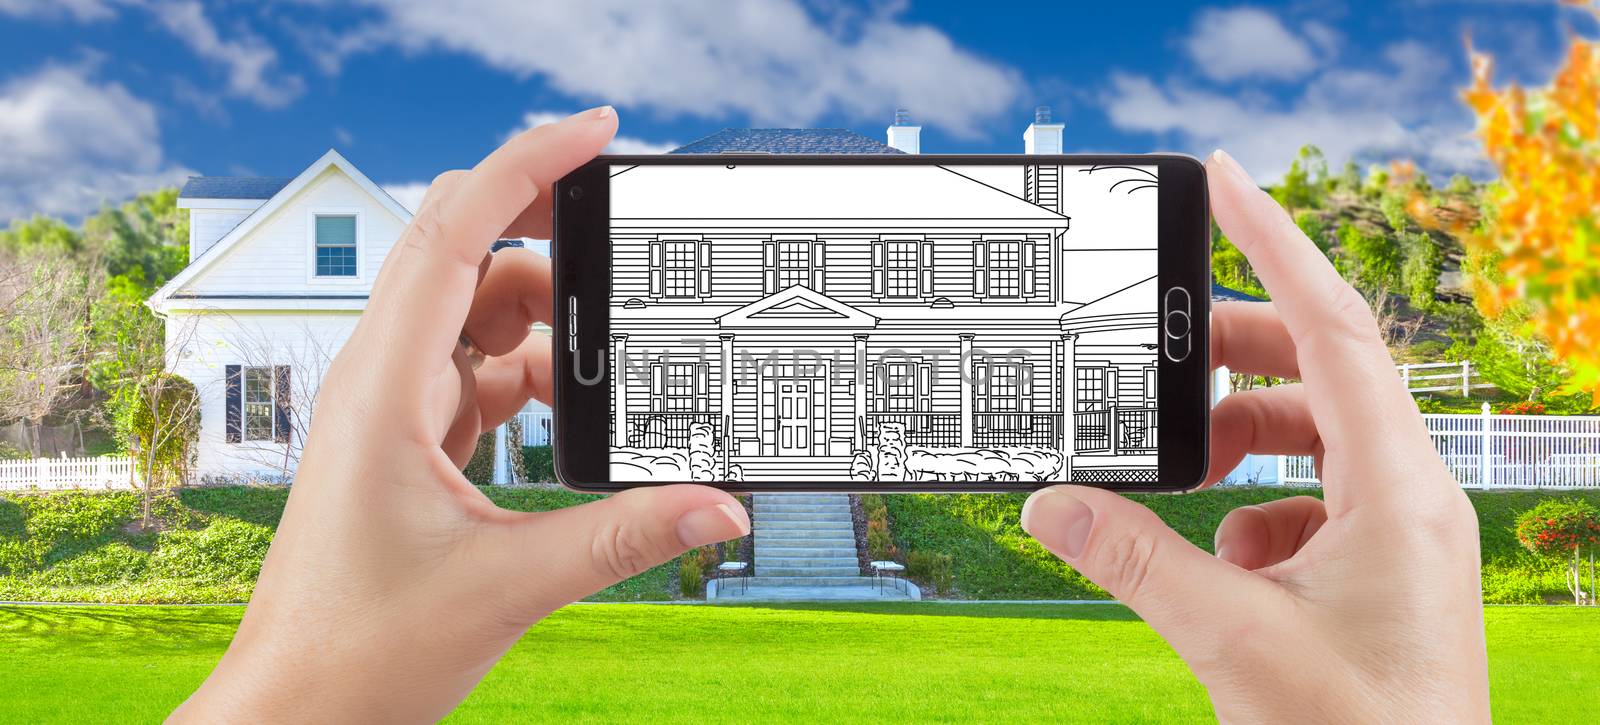 Hands Holding Smart Phone Displaying Drawing of Home Photo Behind by Feverpitched